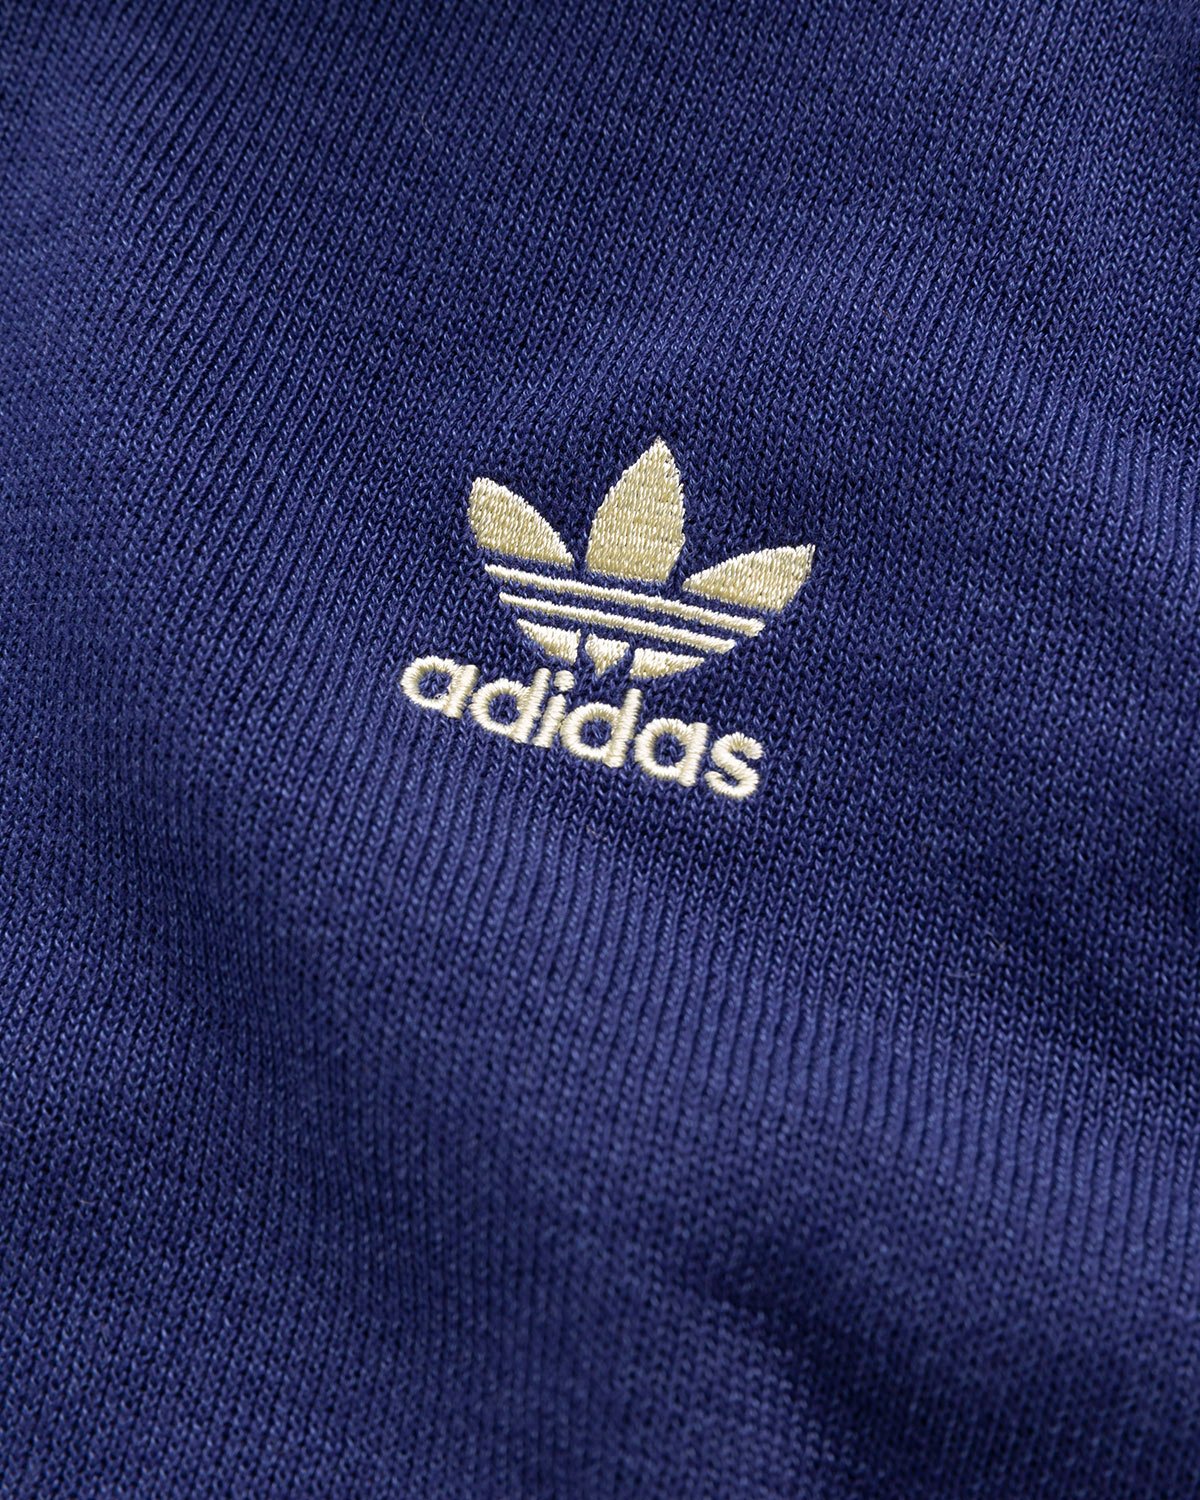 Adidas x Wales Bonner - 80s Track Top Night Sky - Clothing - Blue - Image 4